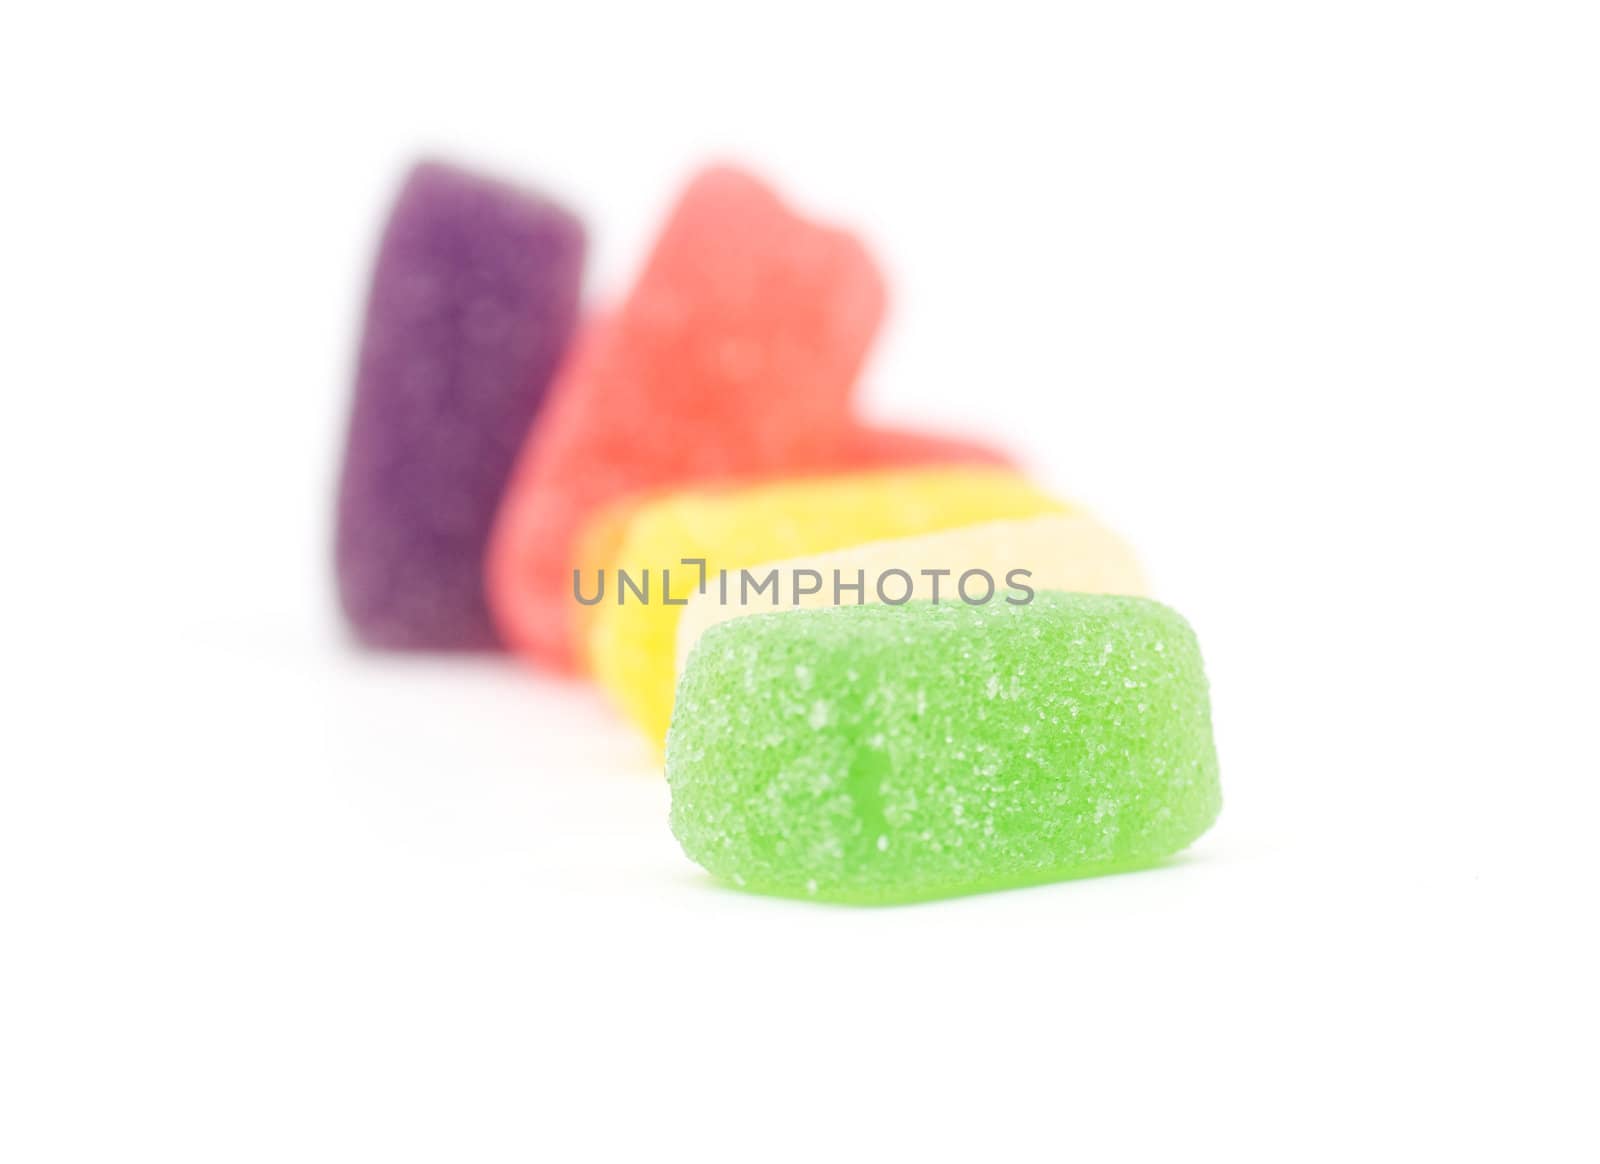 Multi colored fruit jelly candy on white background